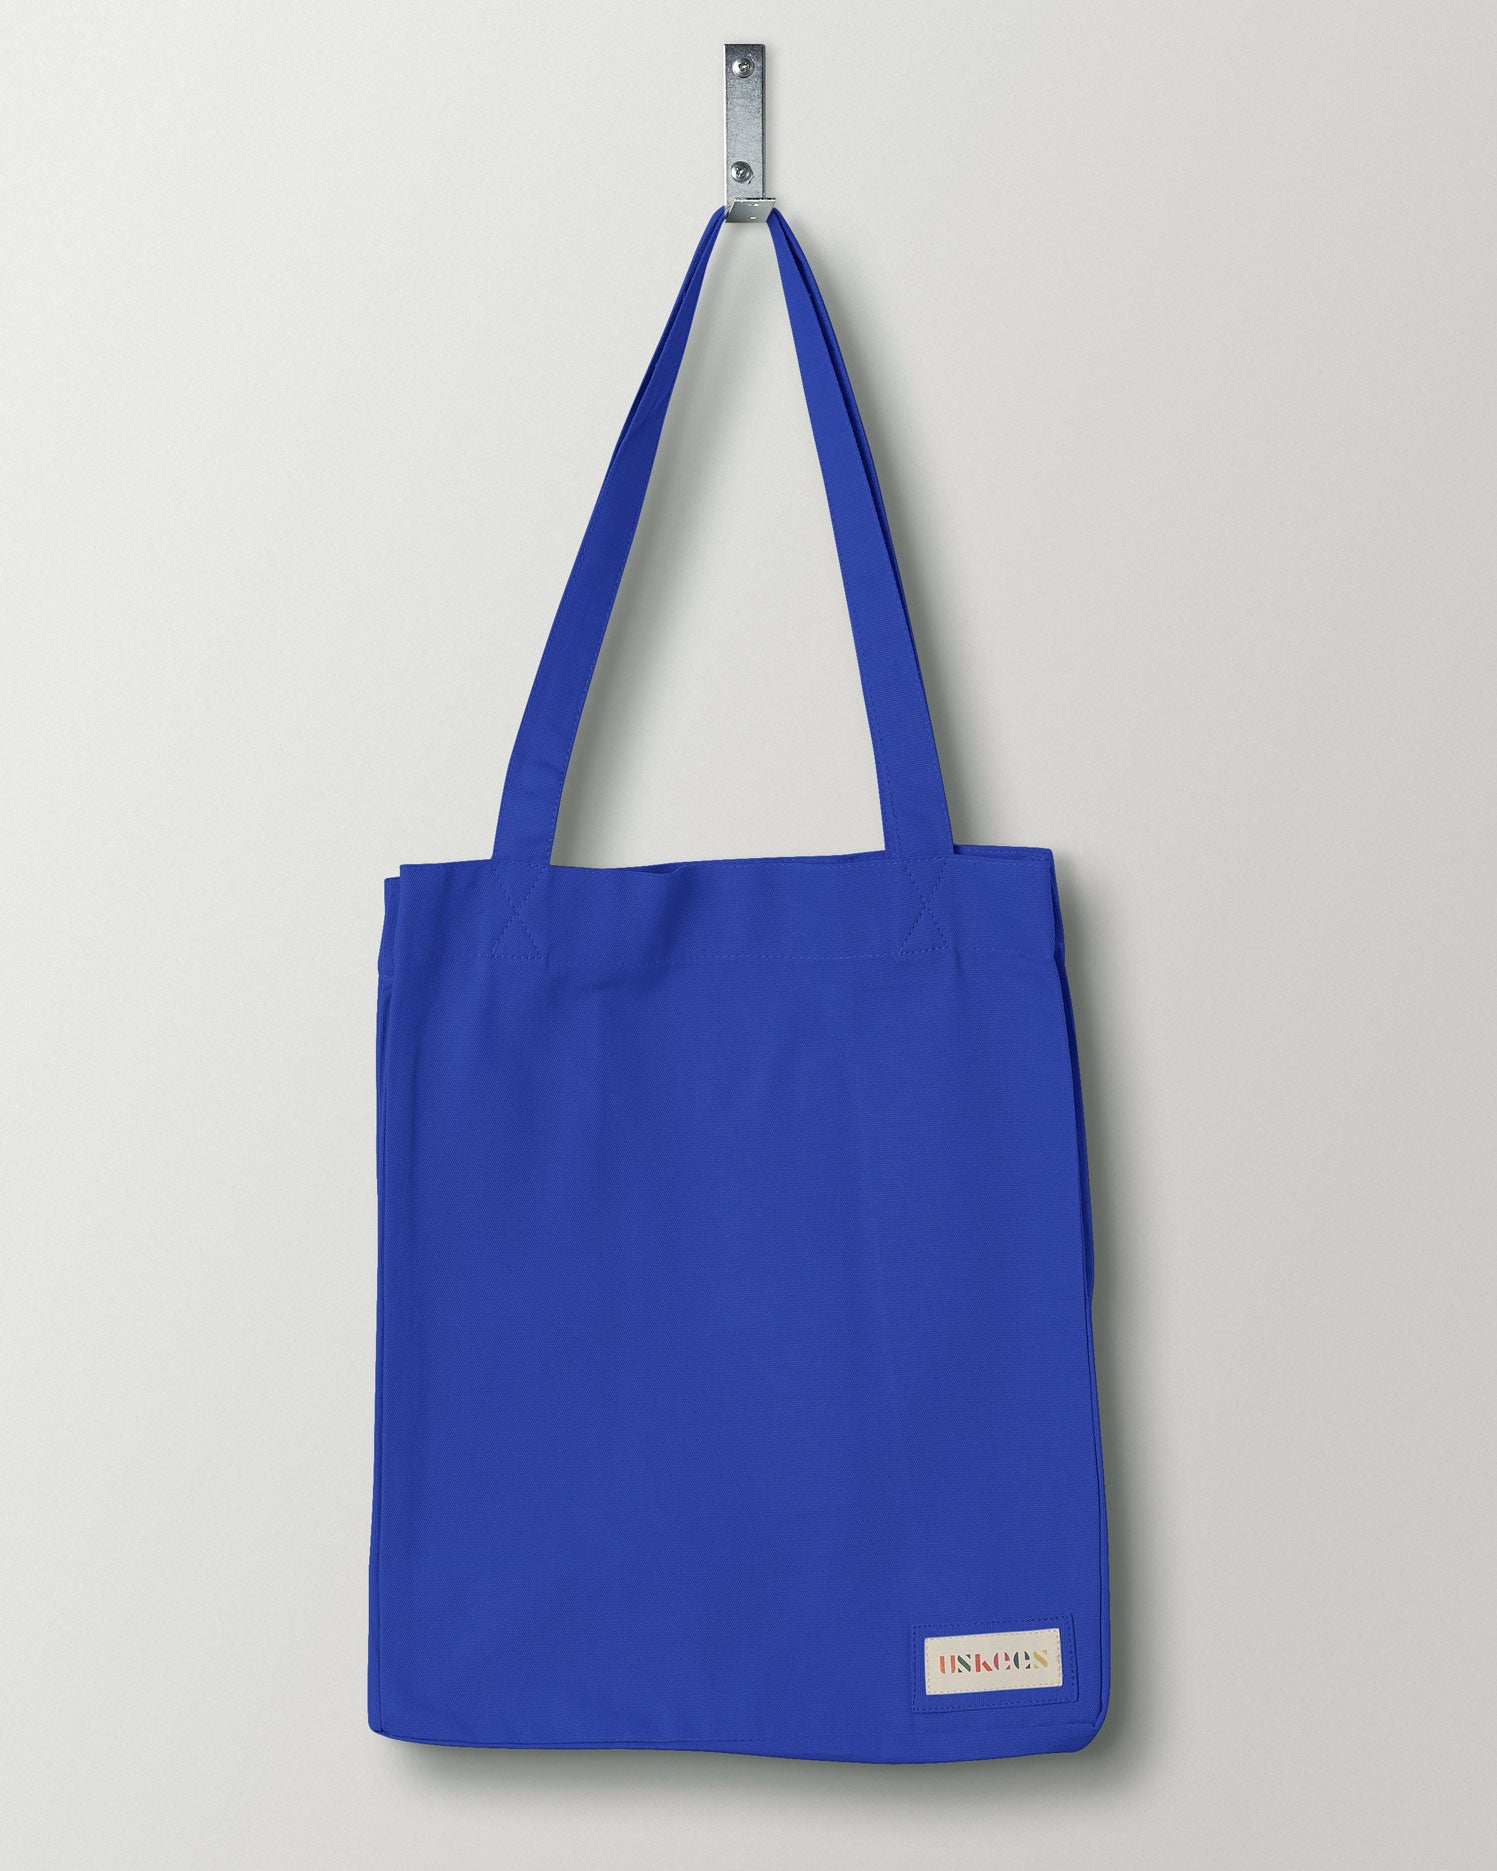 Full front hanging shot of Uskees #4002 small ultra-blue tote bag, showing double handles and Uskees woven logo.